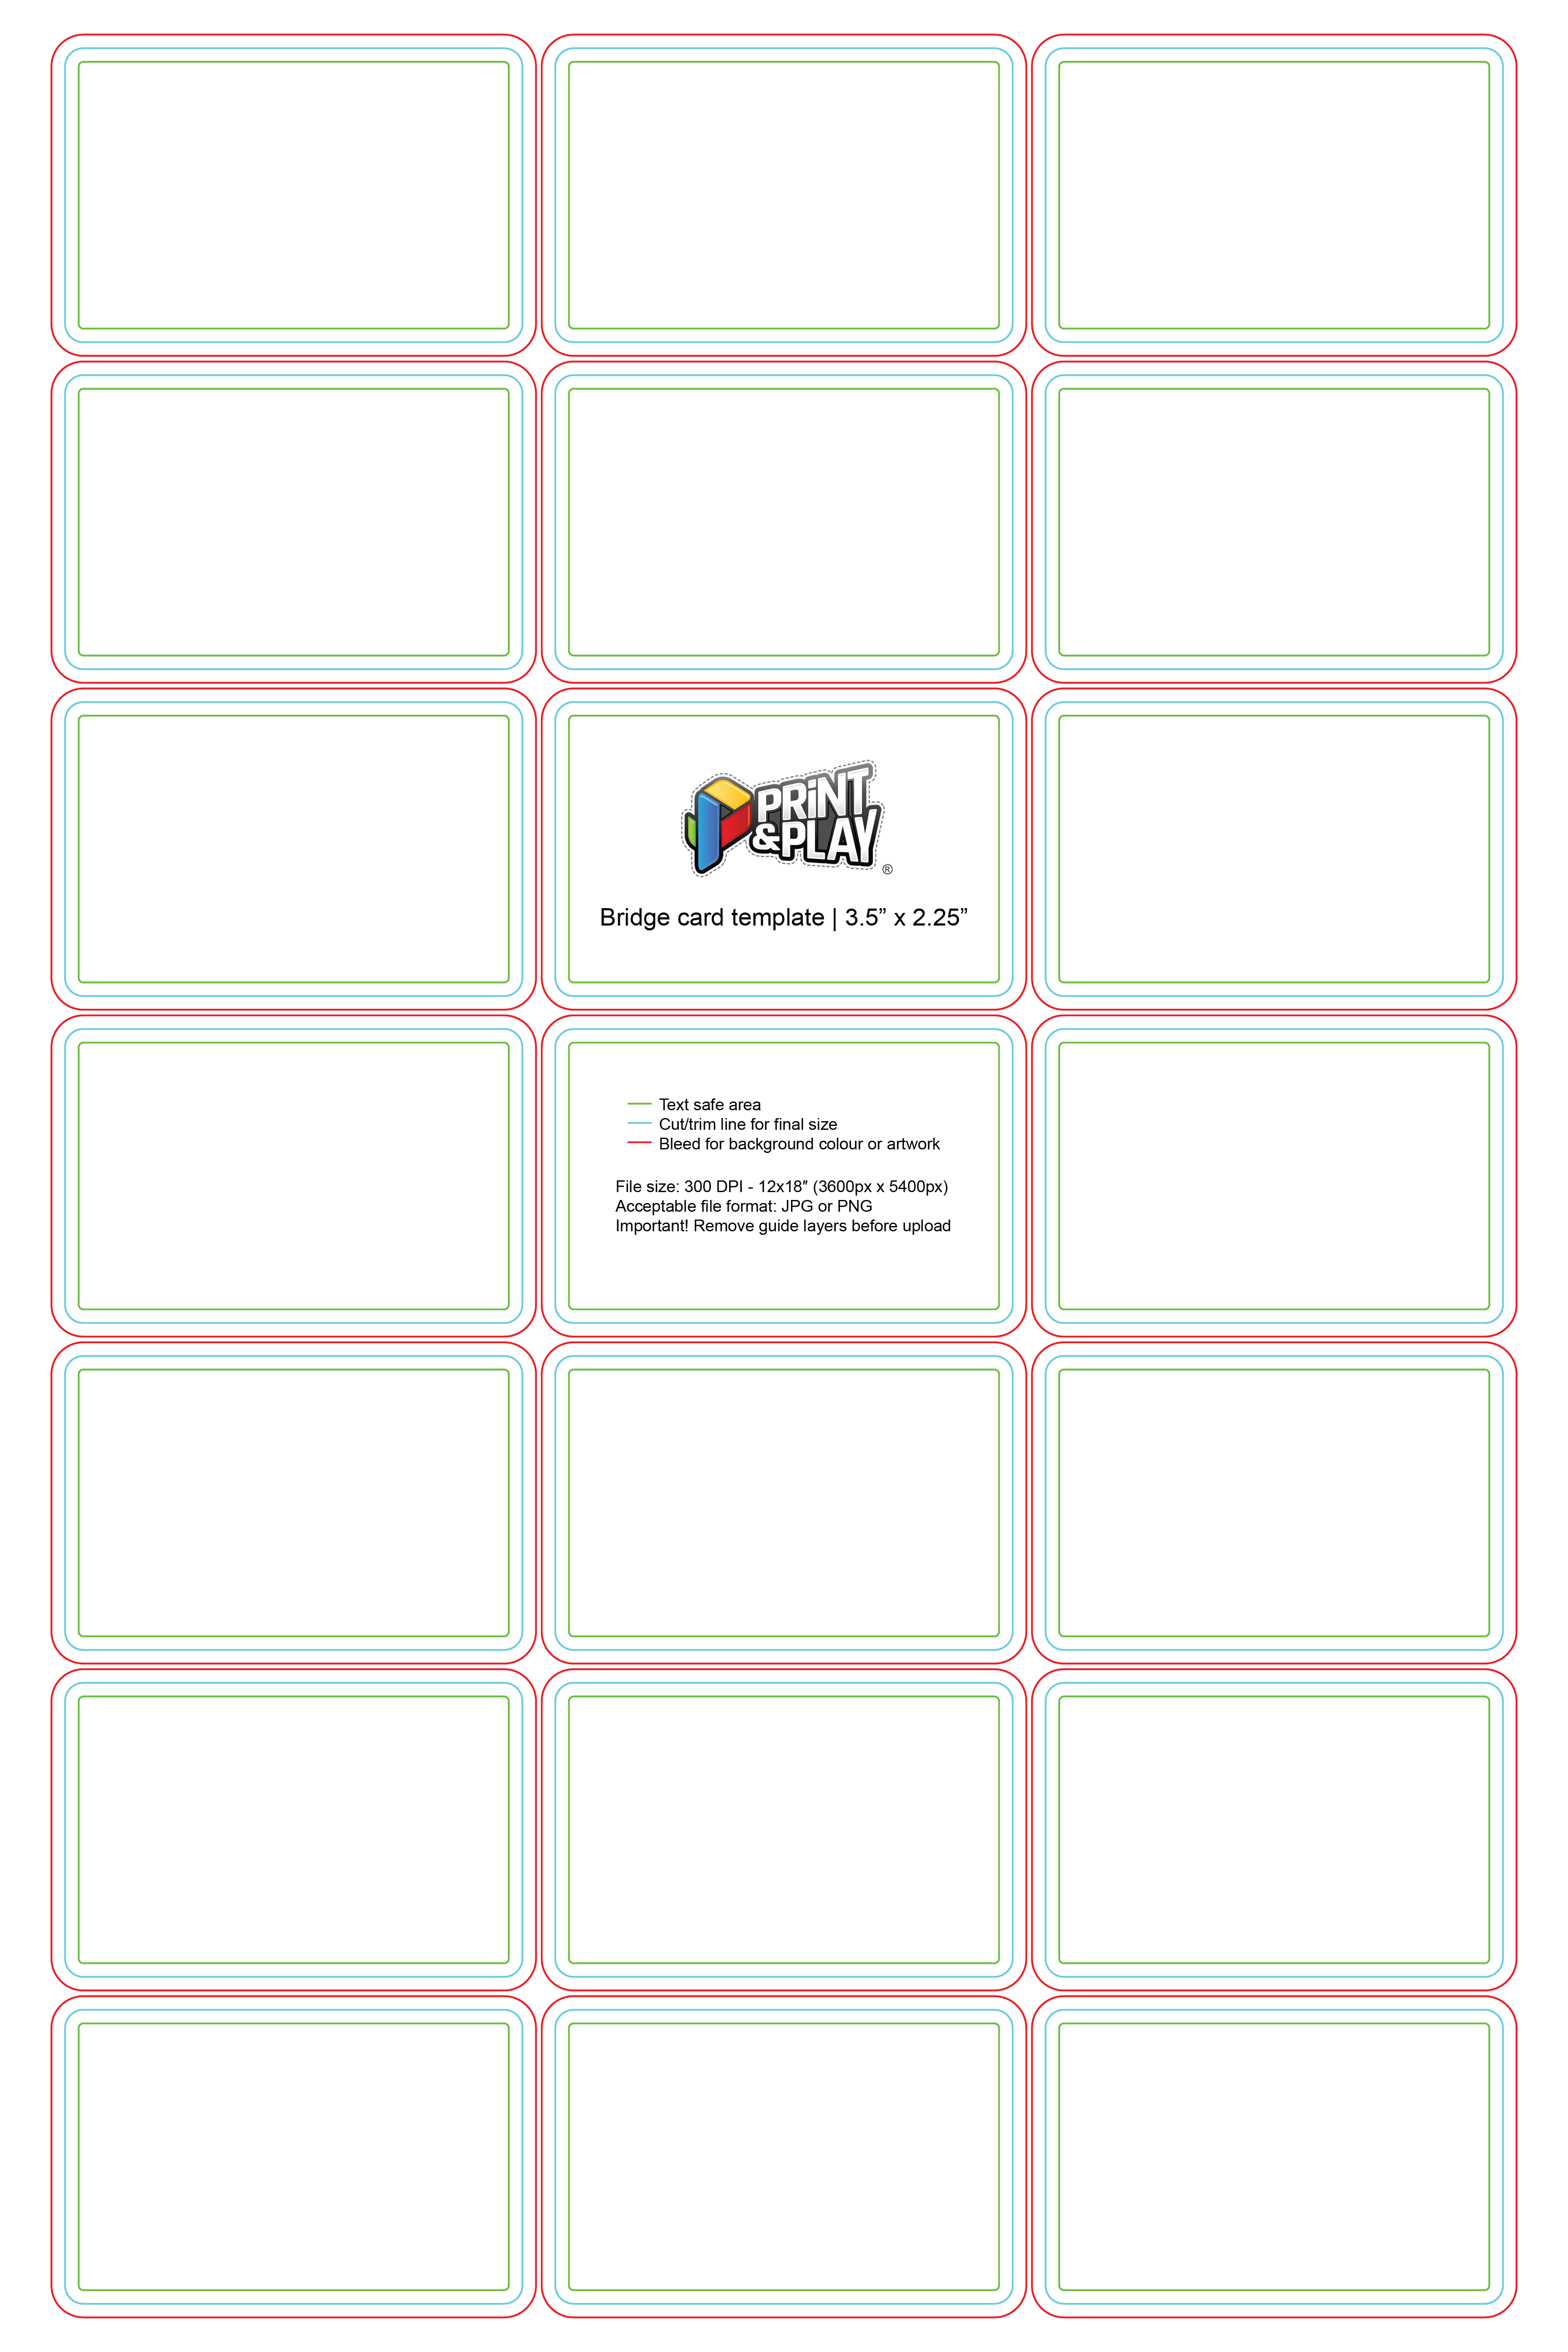 Playing Cards : Formatting & Templates – Print & Play Intended For Card Game Template Maker